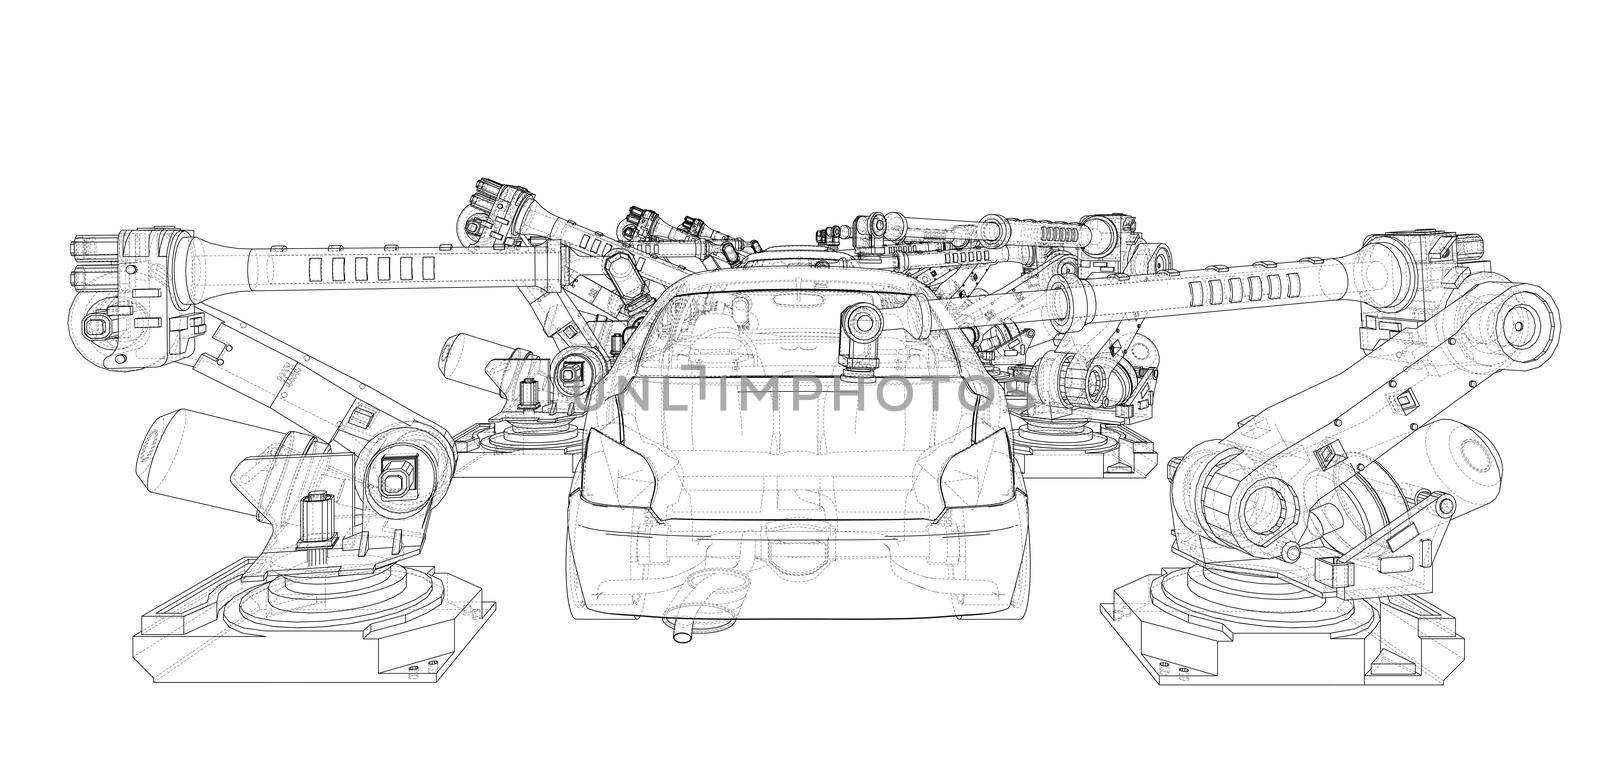 Assembly of motor vehicle. Robotic equipment makes Assembly of car. Blueprint style. 3d illustration